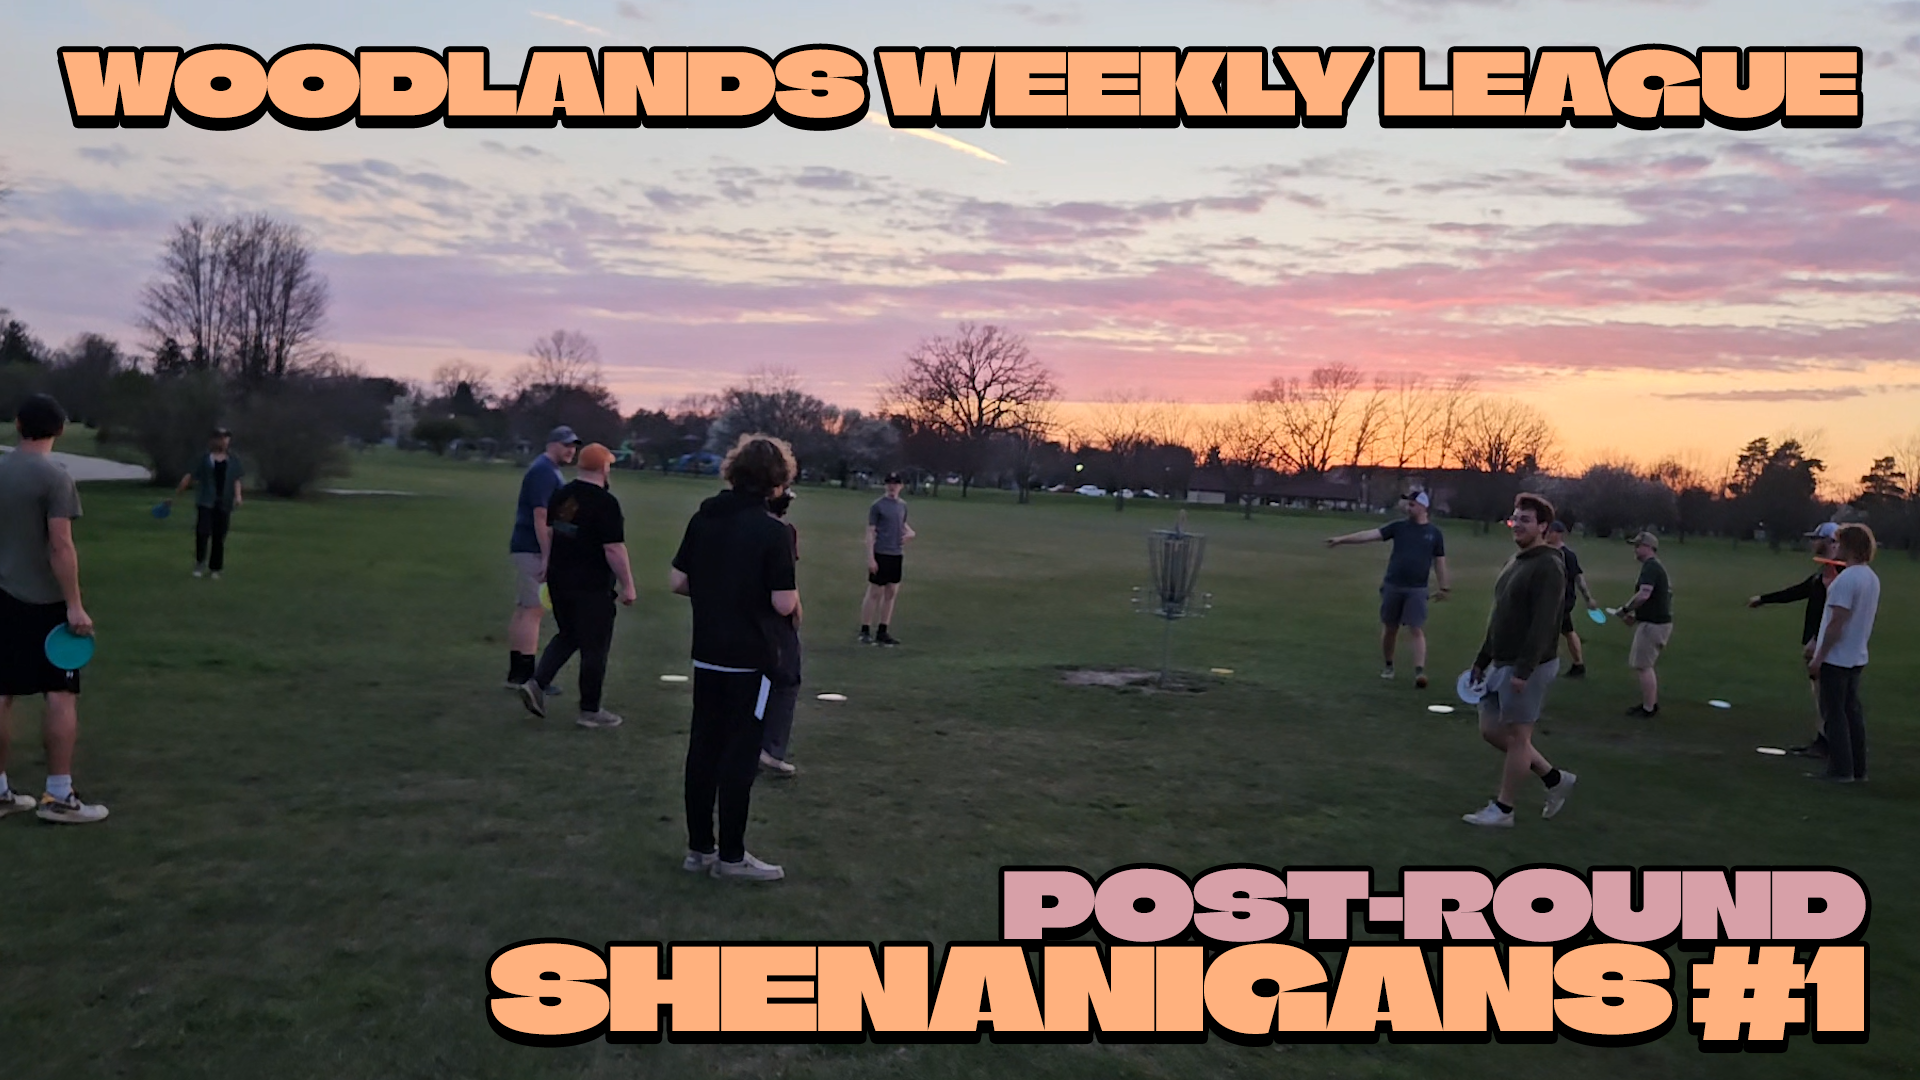 Load video: Disc golfers at Woodlands Park in Perrysburg, Ohio throwing at a designated closest to the pin hole.